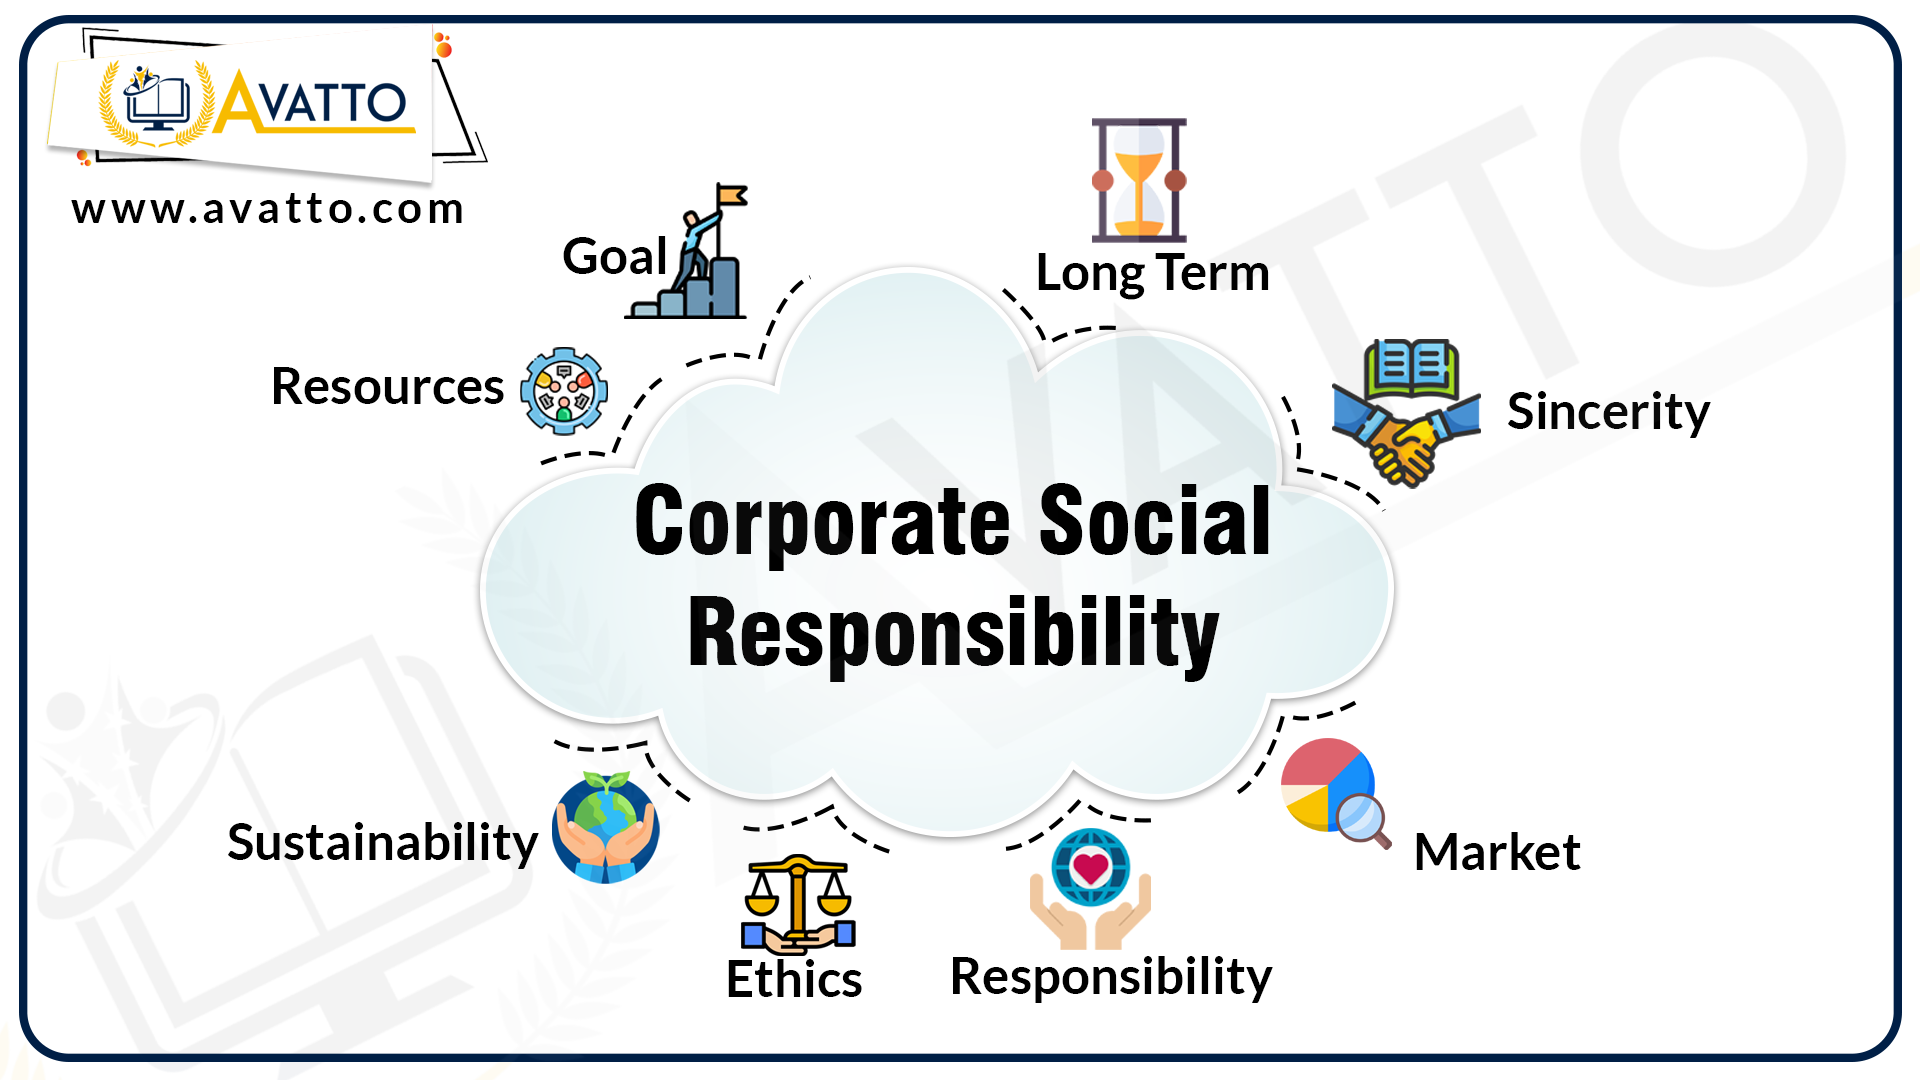 What do you understand by Corporate Social Responsibility Avatto